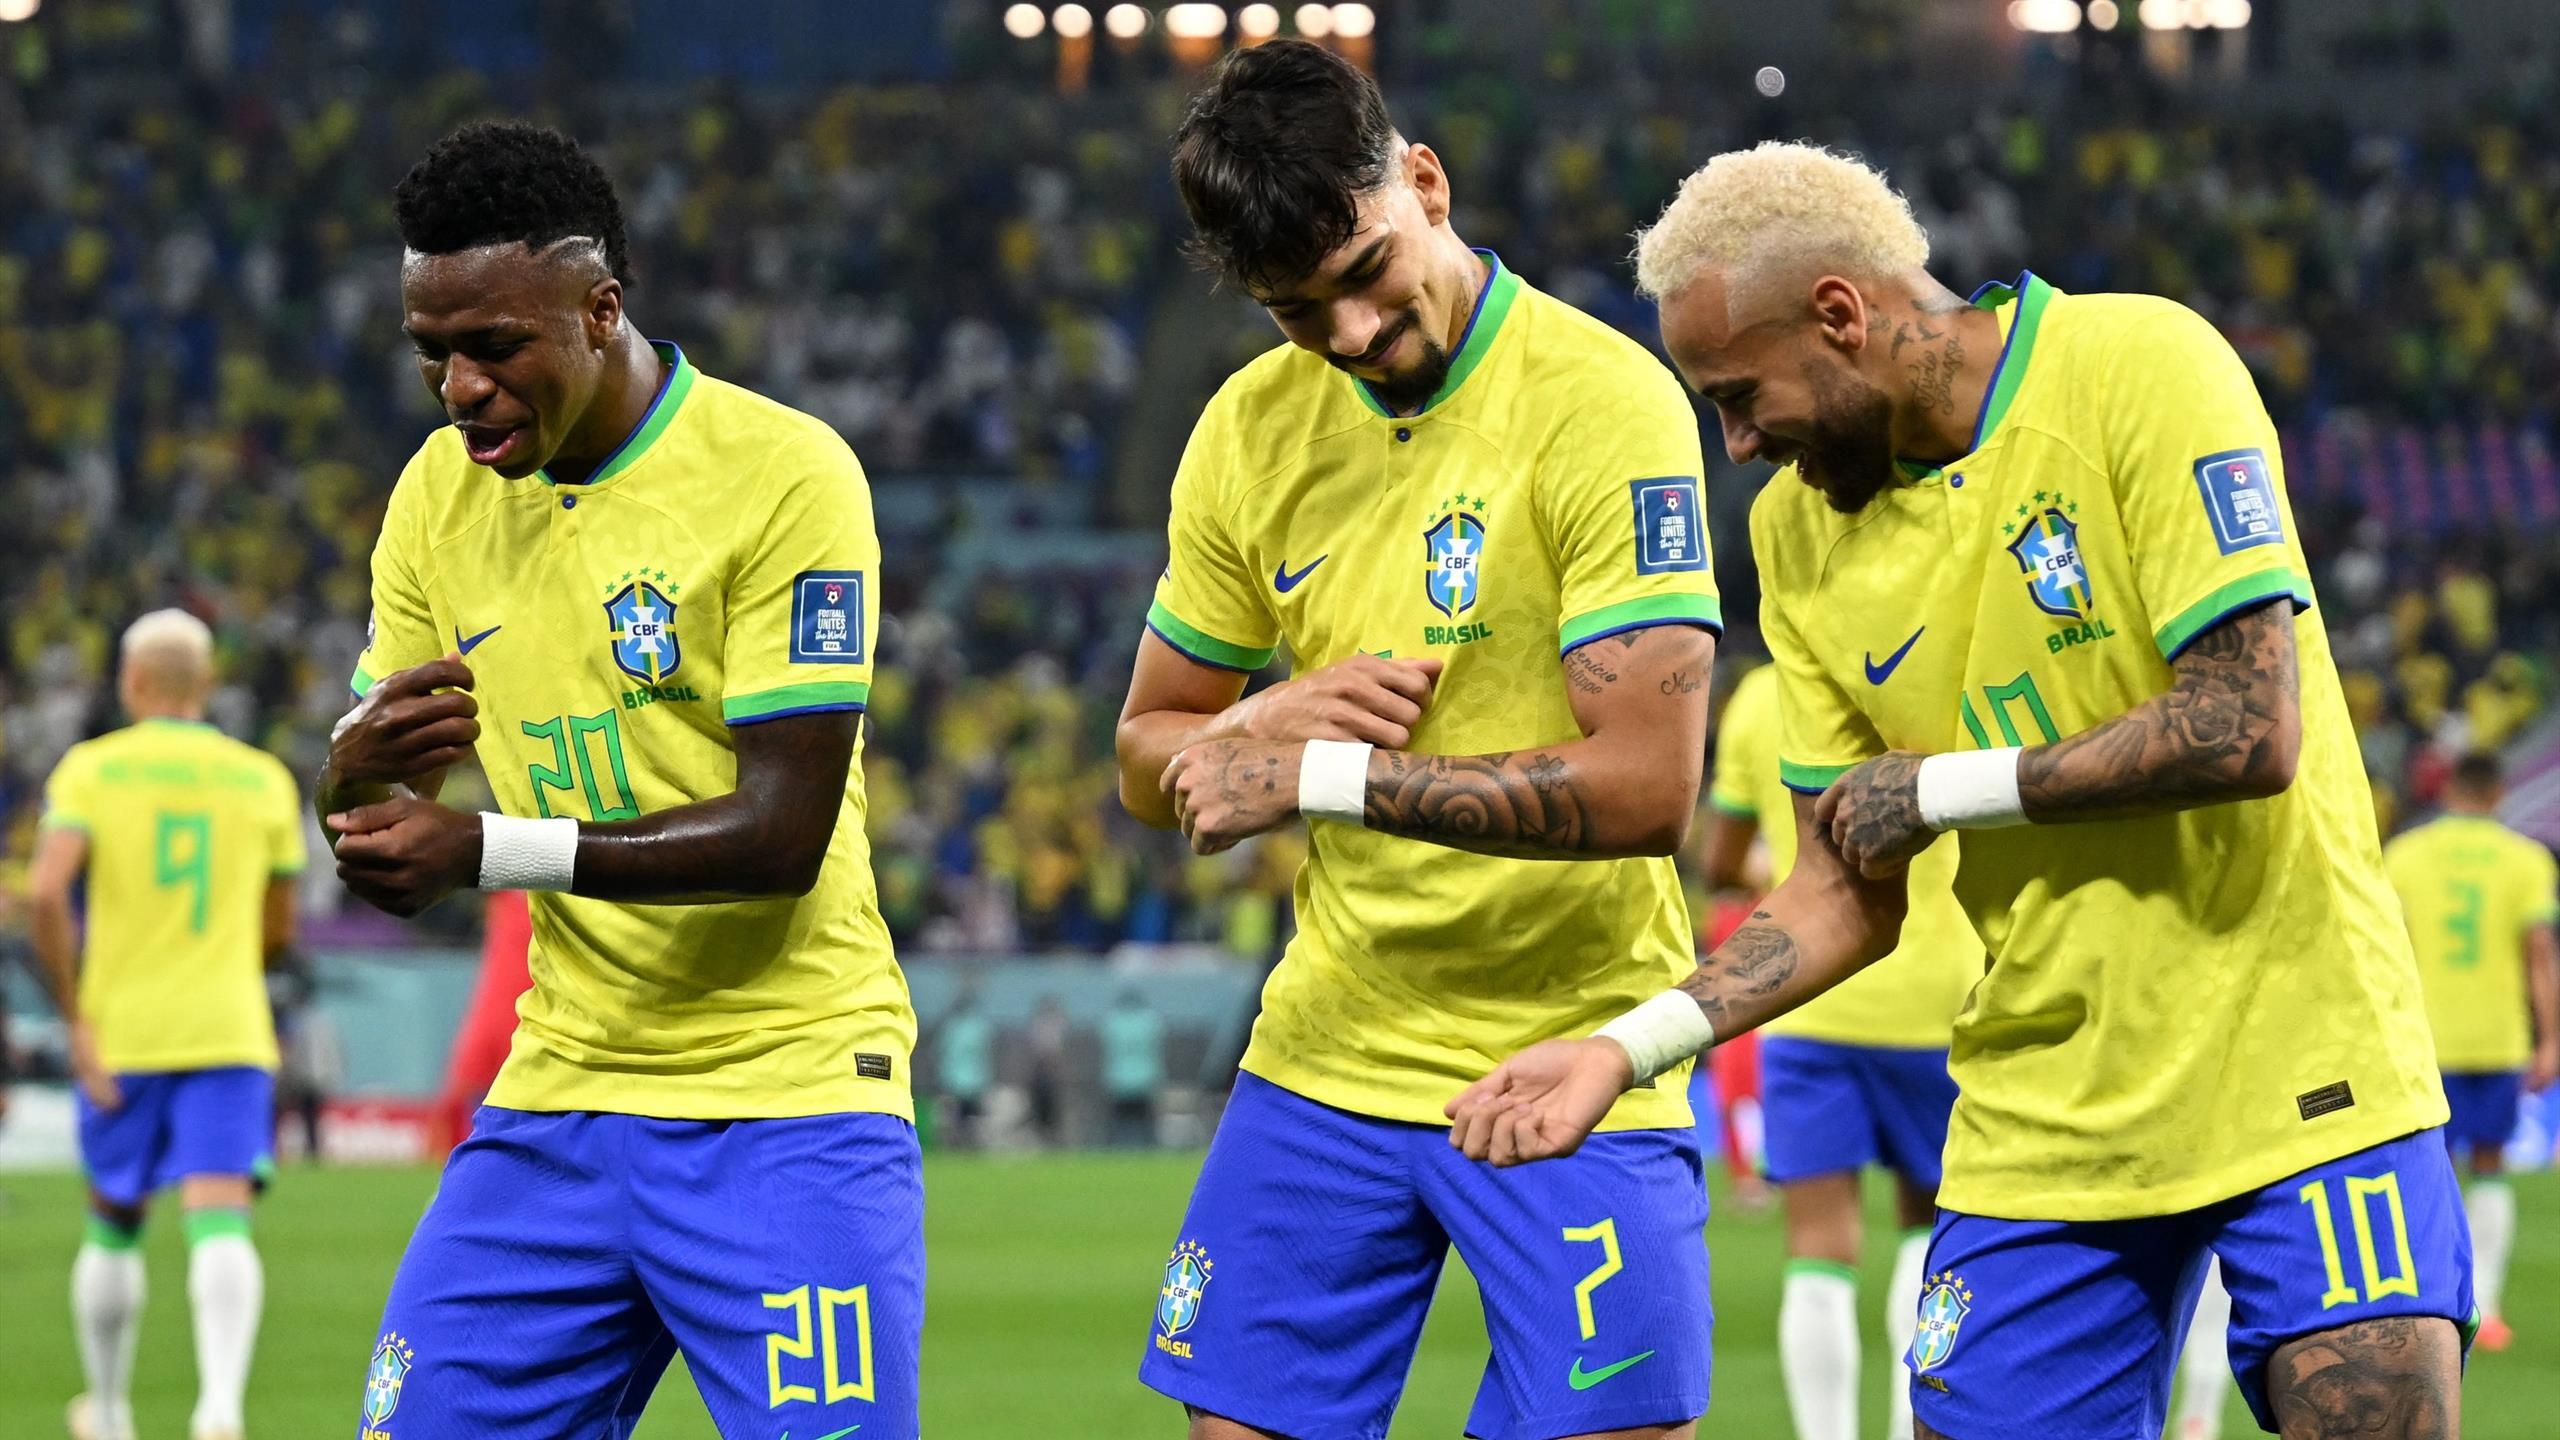 Brazils dancing upsets the Celebration Police during World Cup mauling of South Korea - The Warm-Up